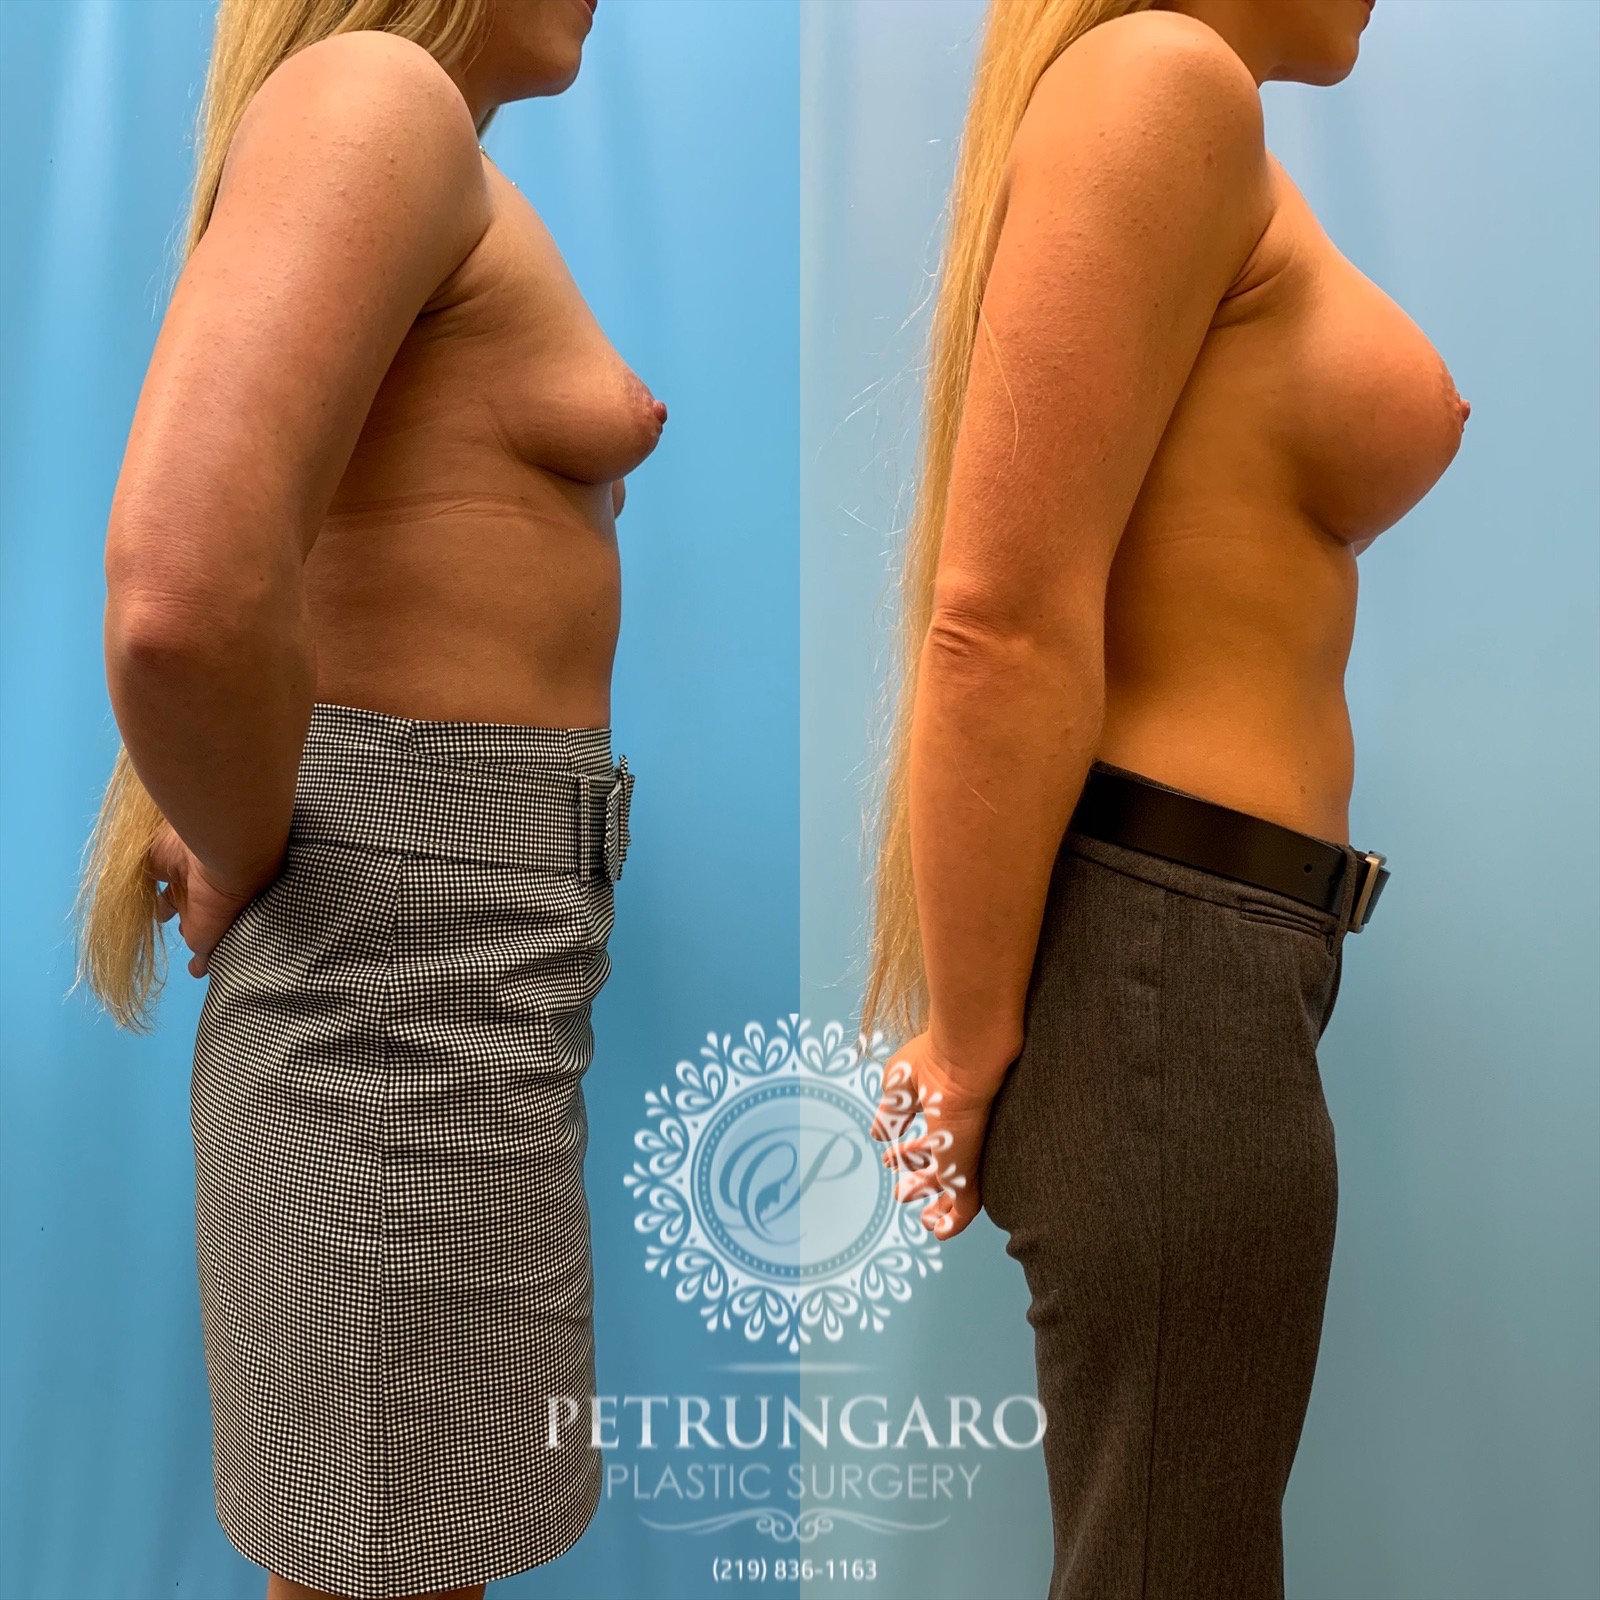 31 year old woman 3 months after breast augmentation-3